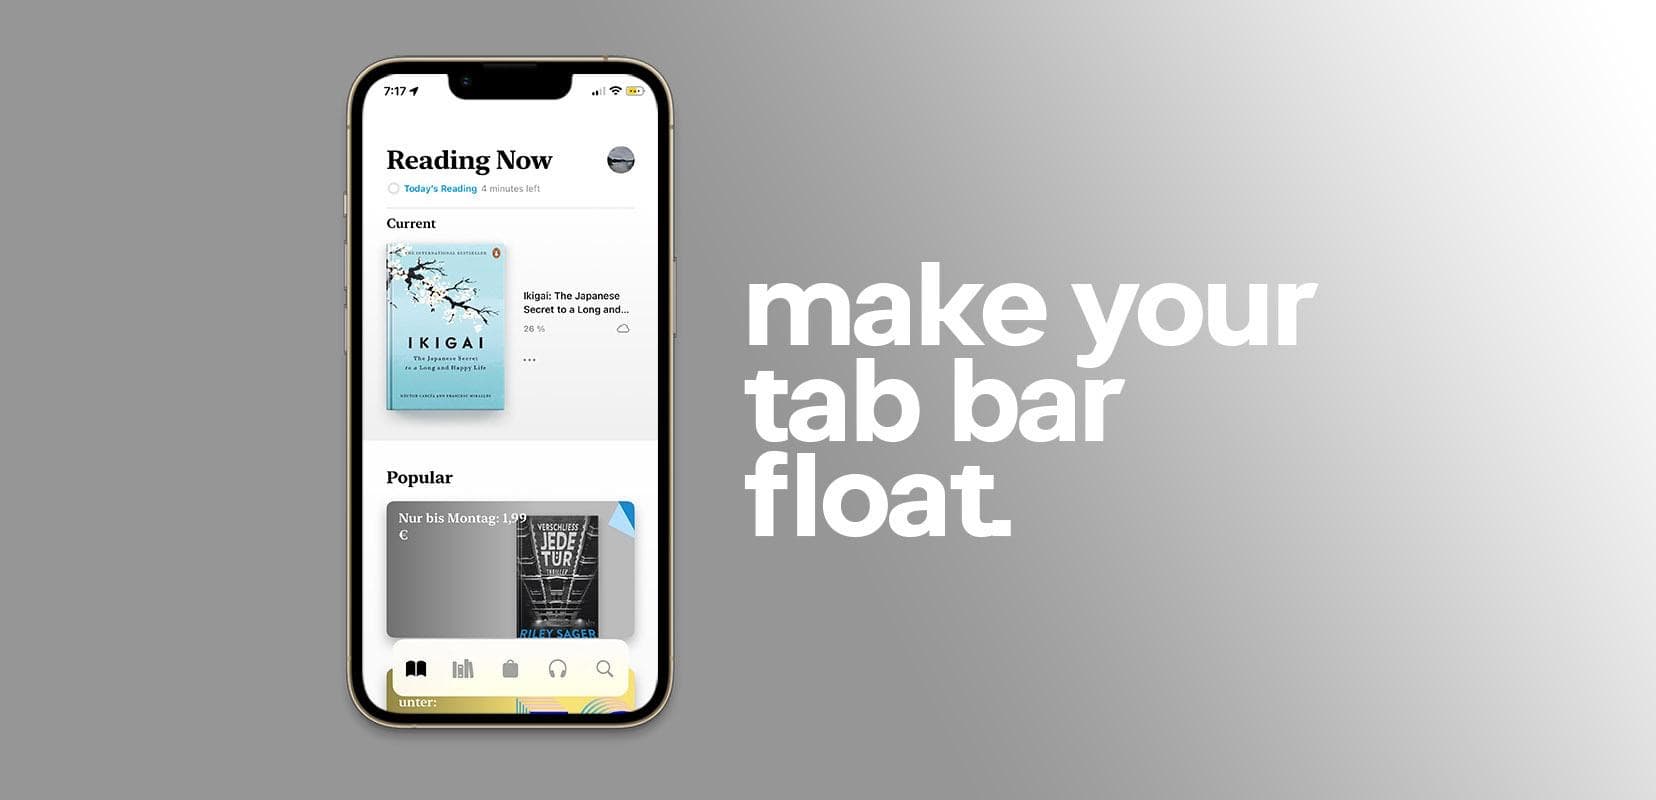 Fiona brings a customizable floating Tab Bar to several apps on jailbroken iPhones